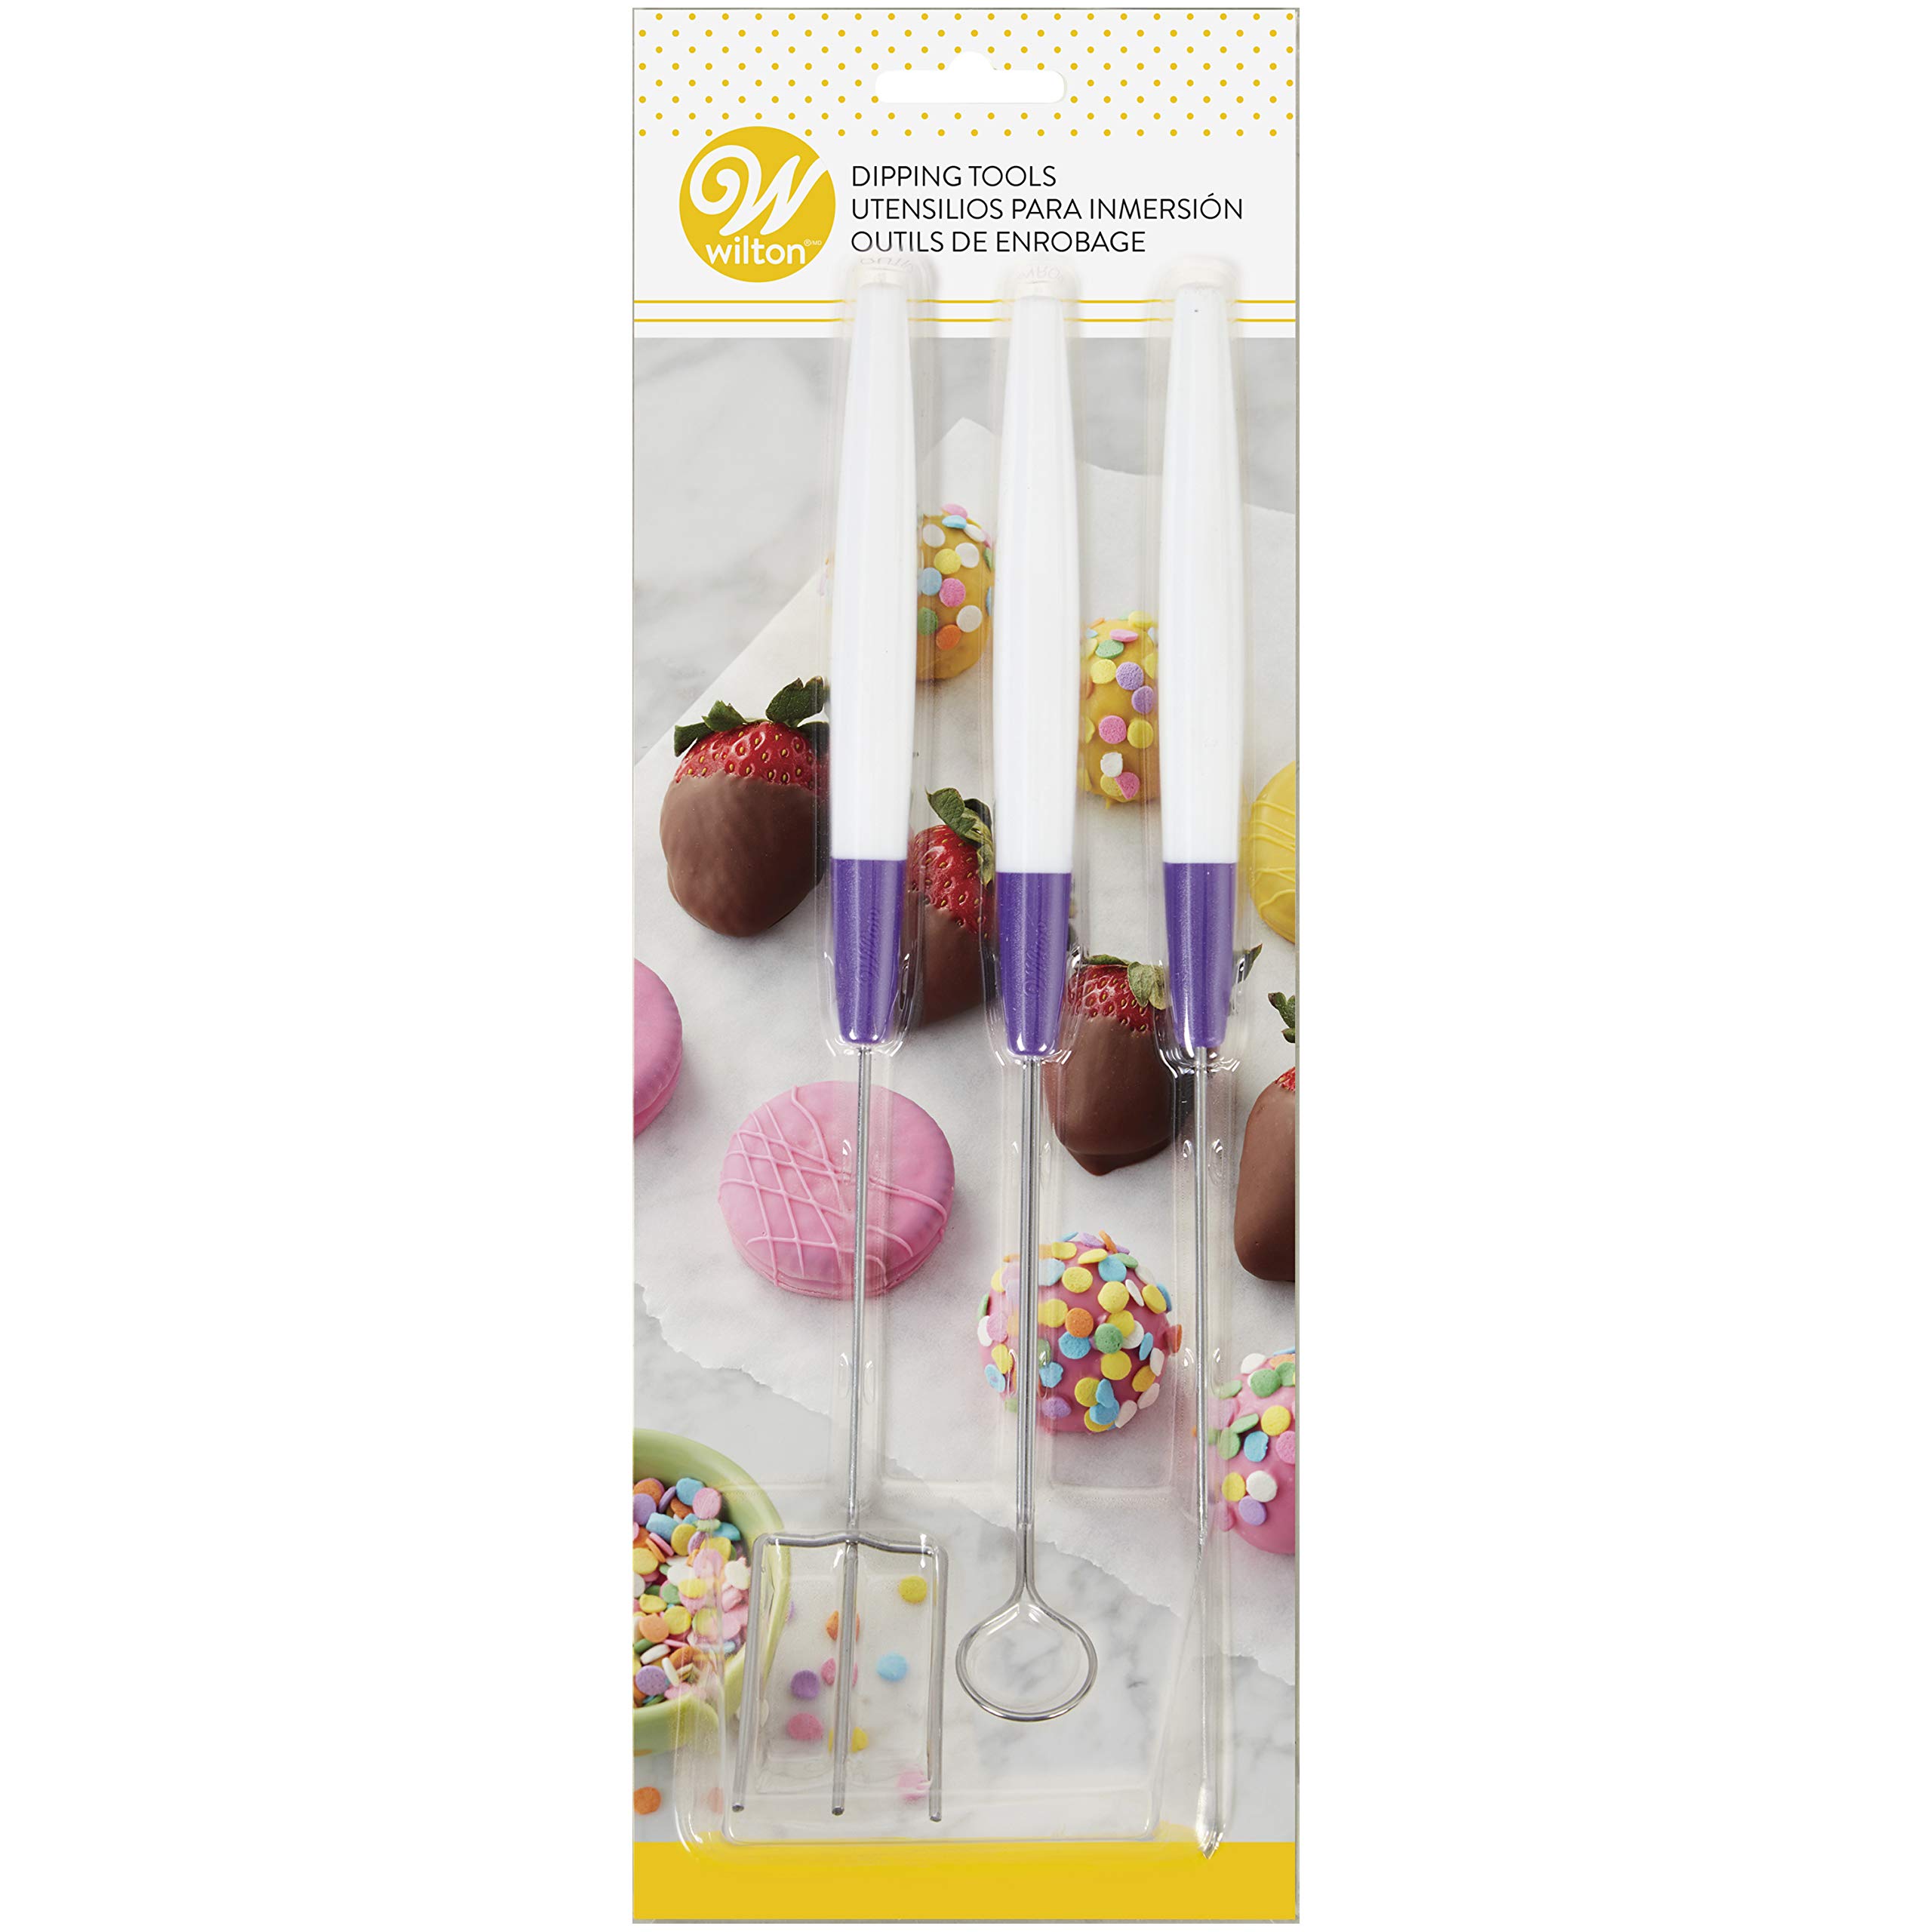 Wilton Candy Melts Candy Dipping Tool Set, Ideal for Strawberries, Cake Pops, Pretzels or Marshmallows, Includes 3-Prong Fork,Cradling Spoon and Spear, Tools Only,Candy Melts Not Included,White/Purple